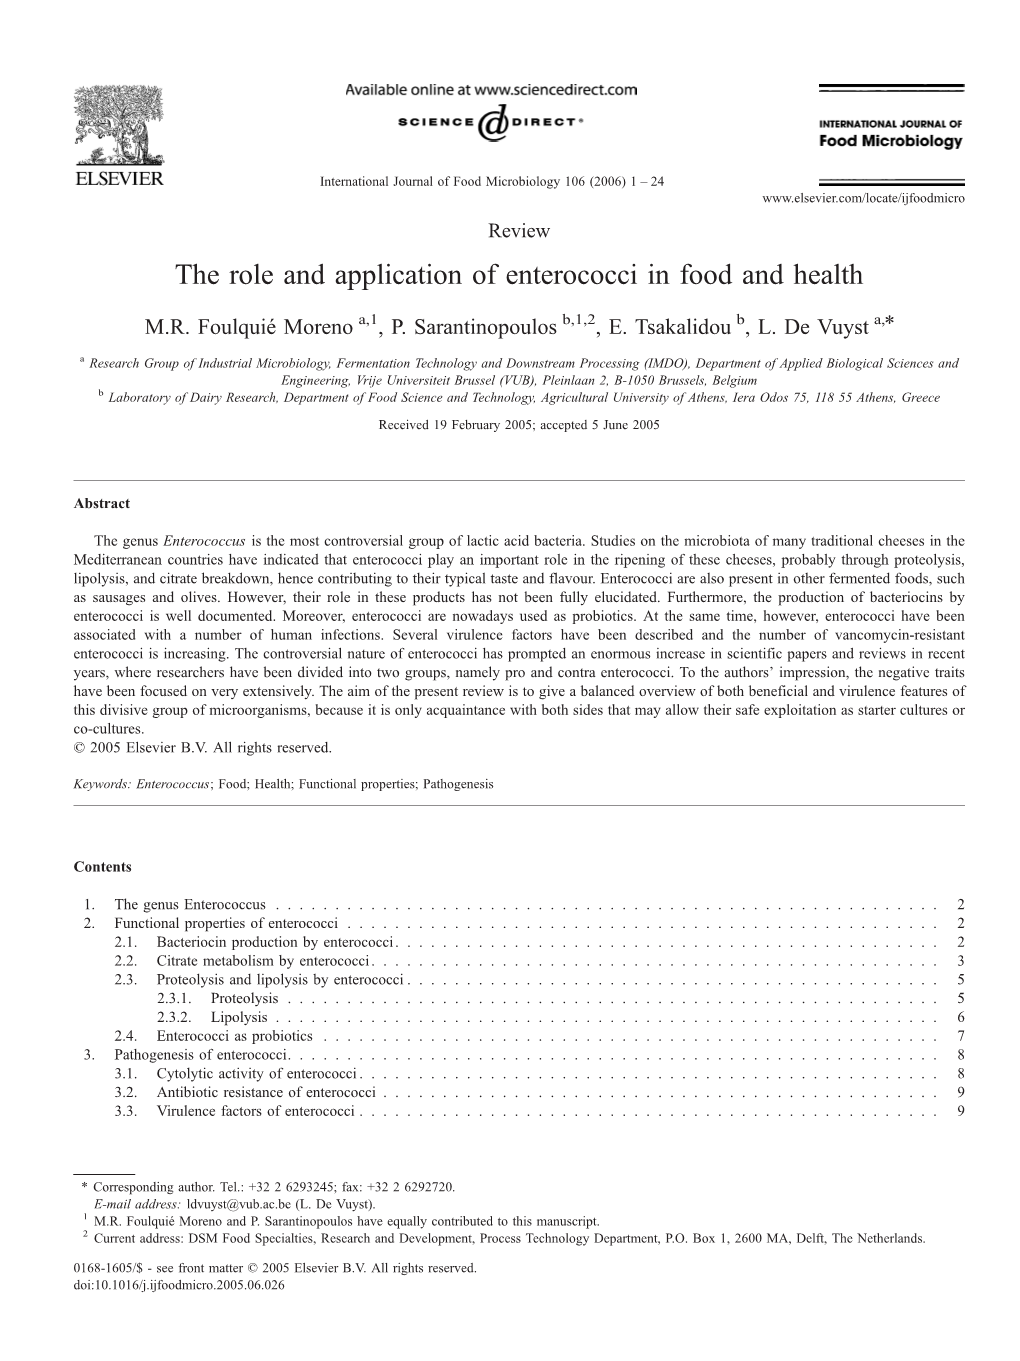 The Role and Application of Enterococci in Food and Health